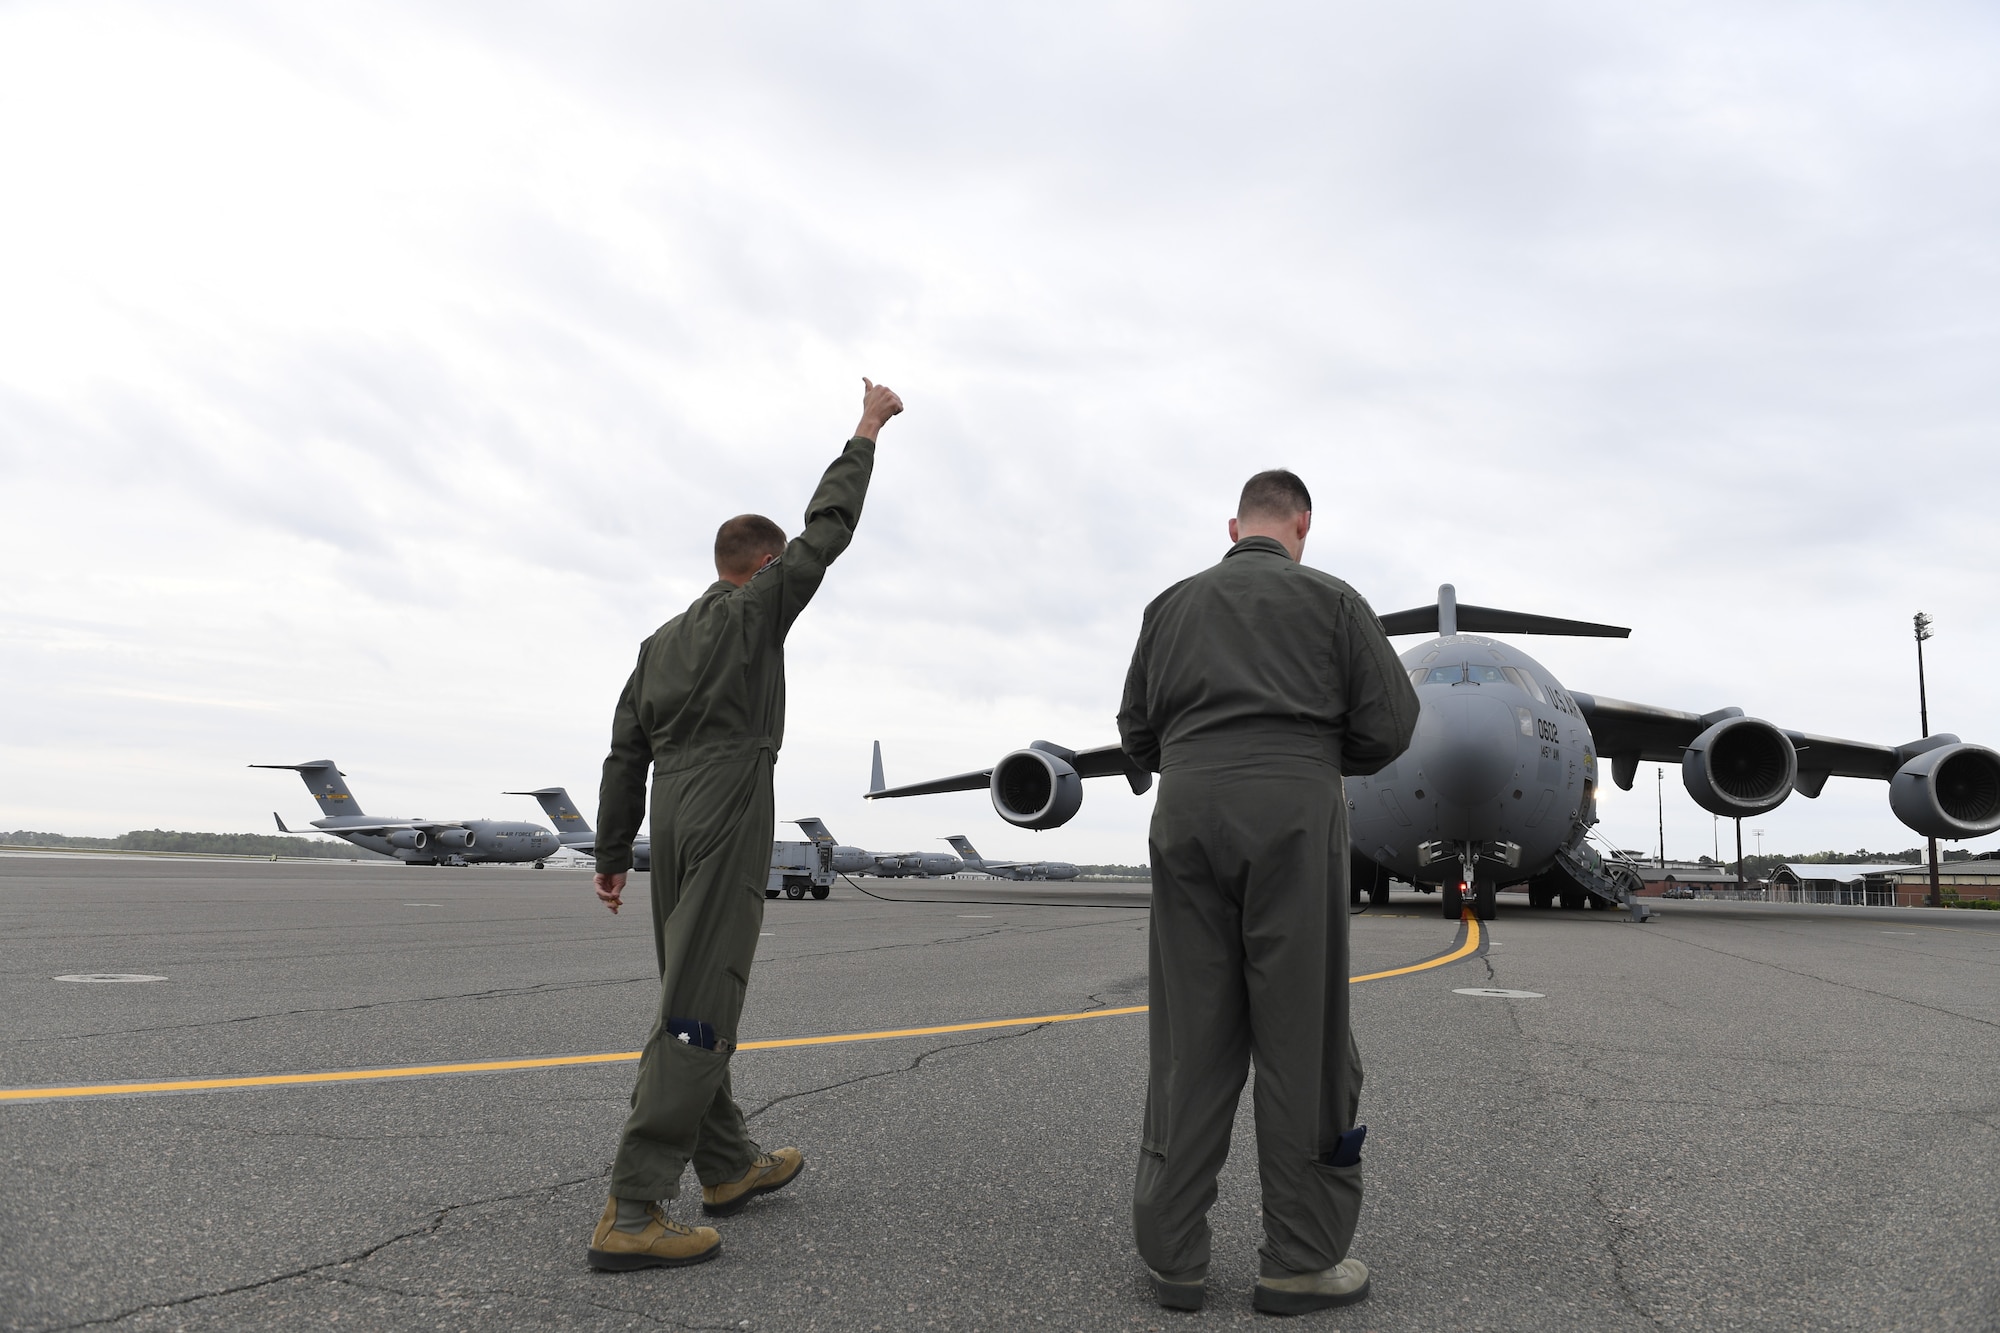 U.S. Air Force Lt. Col. Michael Lineberger (left), 145th Operations Group, and Col. Kevin Harkey commander of the 145th Operations Group, do a walk around check of a C-17 Globemaster III aircraft prior to flight at Joint Base Charleston, S.C., April 7, 2018. The airframe and crew are on the way to the North Carolina Air National Guard Base, Charlotte Douglas International Airport, April 7, 2018. The airframes’ homecoming will be marked by an Arrival Ceremony. The 145th Airlift Wing (AW) was selected to transition from the C-130 Hercules aircraft to the C-17 Globemaster III aircraft 18 months ago and the airframe will carry the units airlift mission into the future. The first two aircraft, of eight to come to the 145th AW, were previously assigned to the active duty wings at Joint Base Charleston, S.C. and Joint Base Lewis-McChord, Wash.